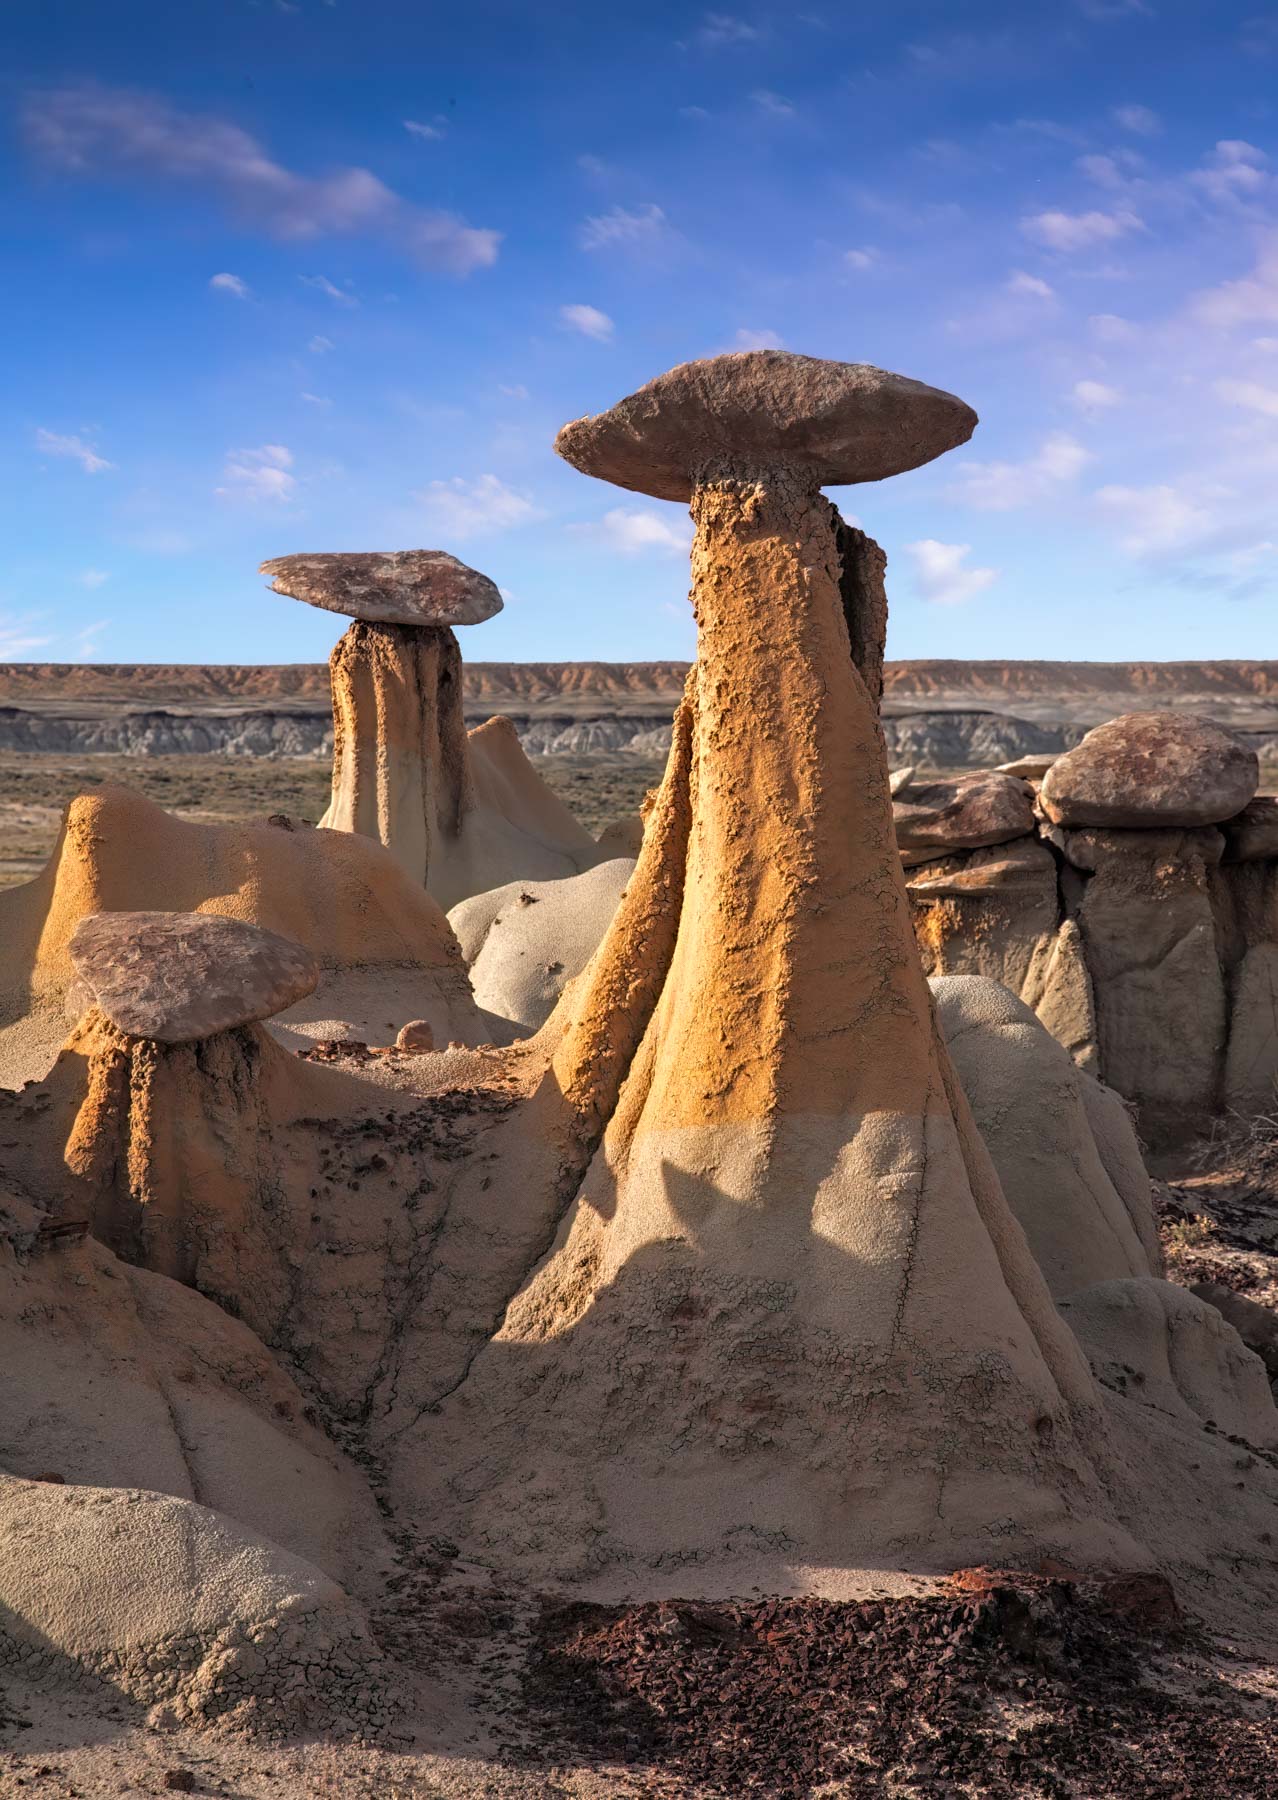 The Yellow Hoodoo in the Ah-shi-sle-pah Wilderness Area, New Mexico